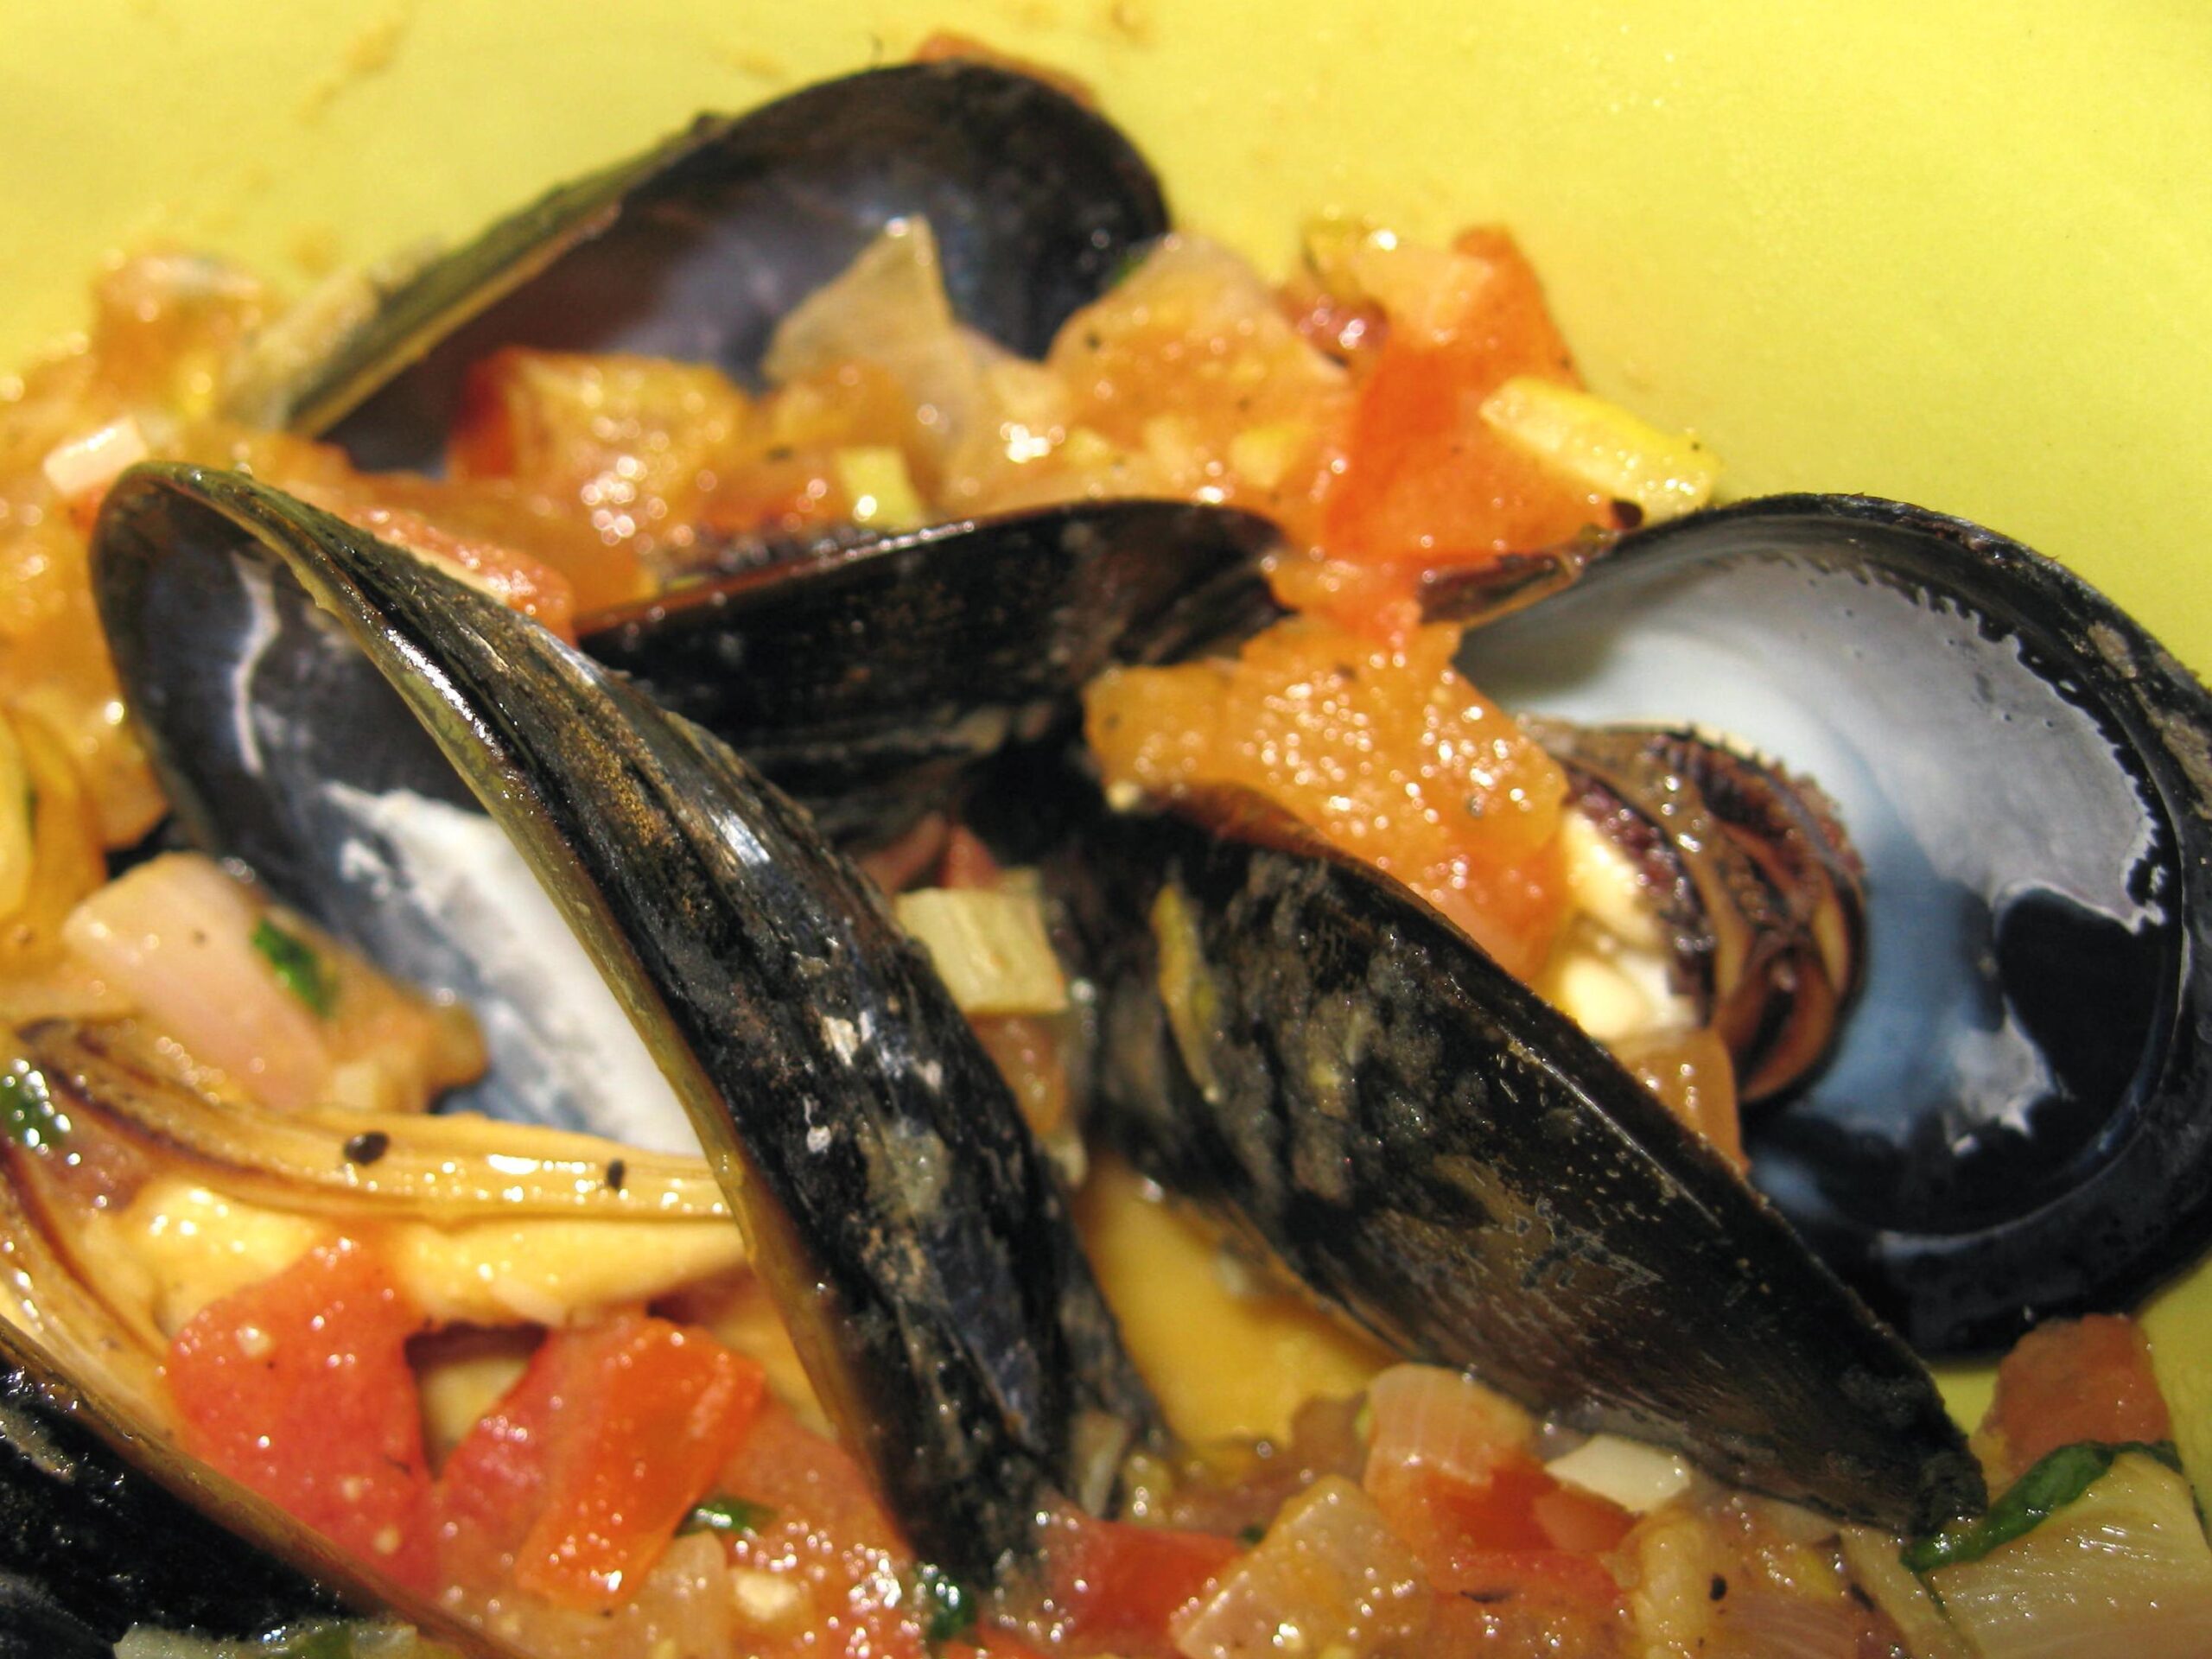  Get ready to impress your taste buds with this exquisite Mussels in Tomato-Basil Wine Sauce!